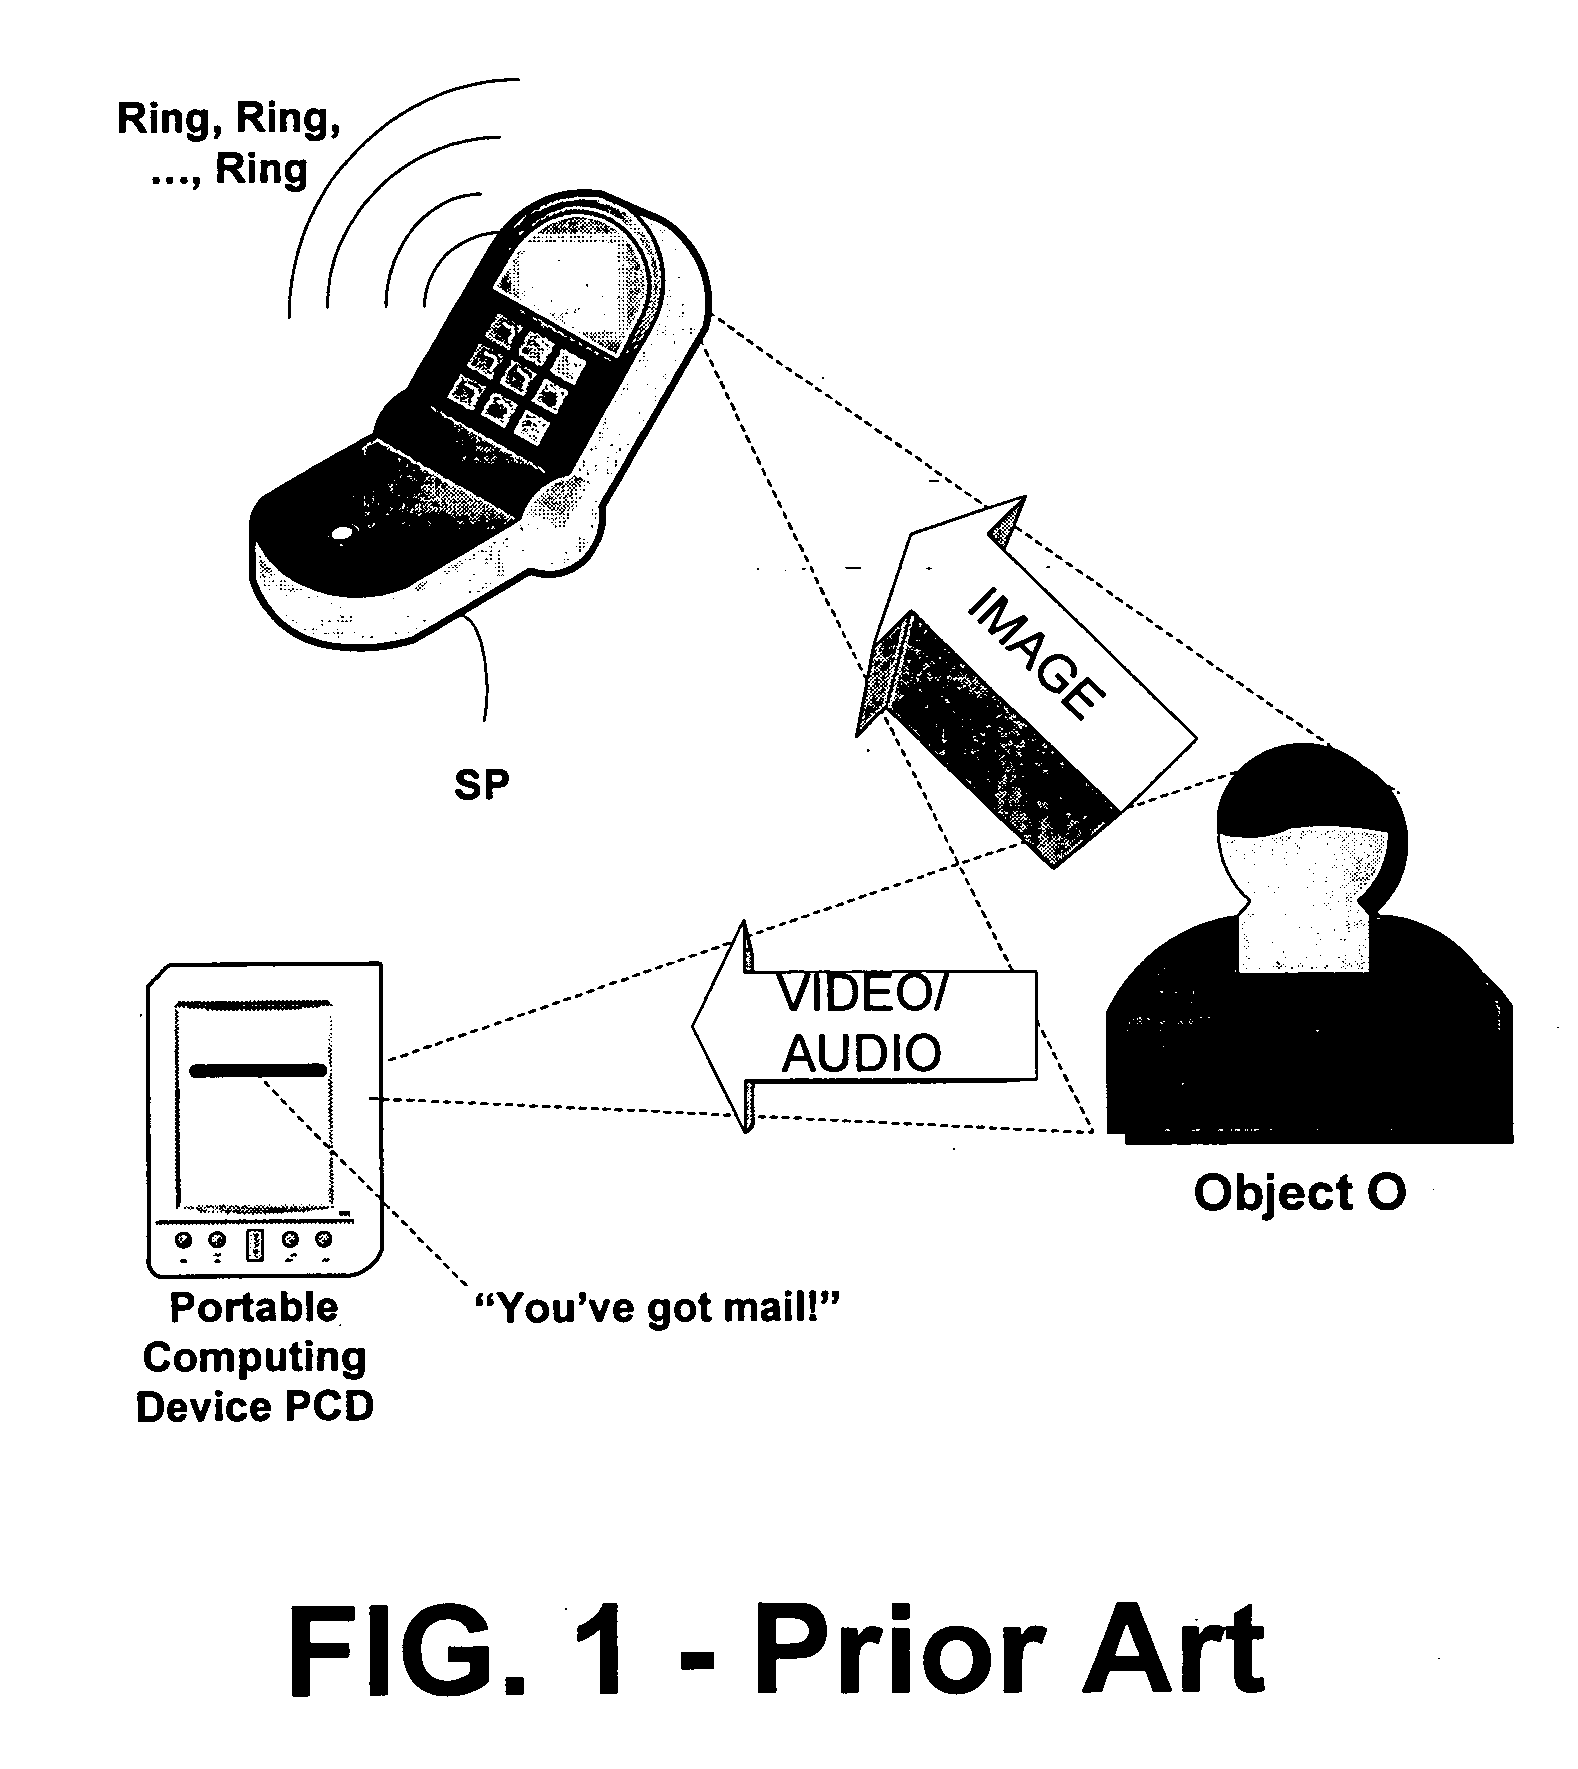 Systems and methods for operating a computing device having image capture capabilities